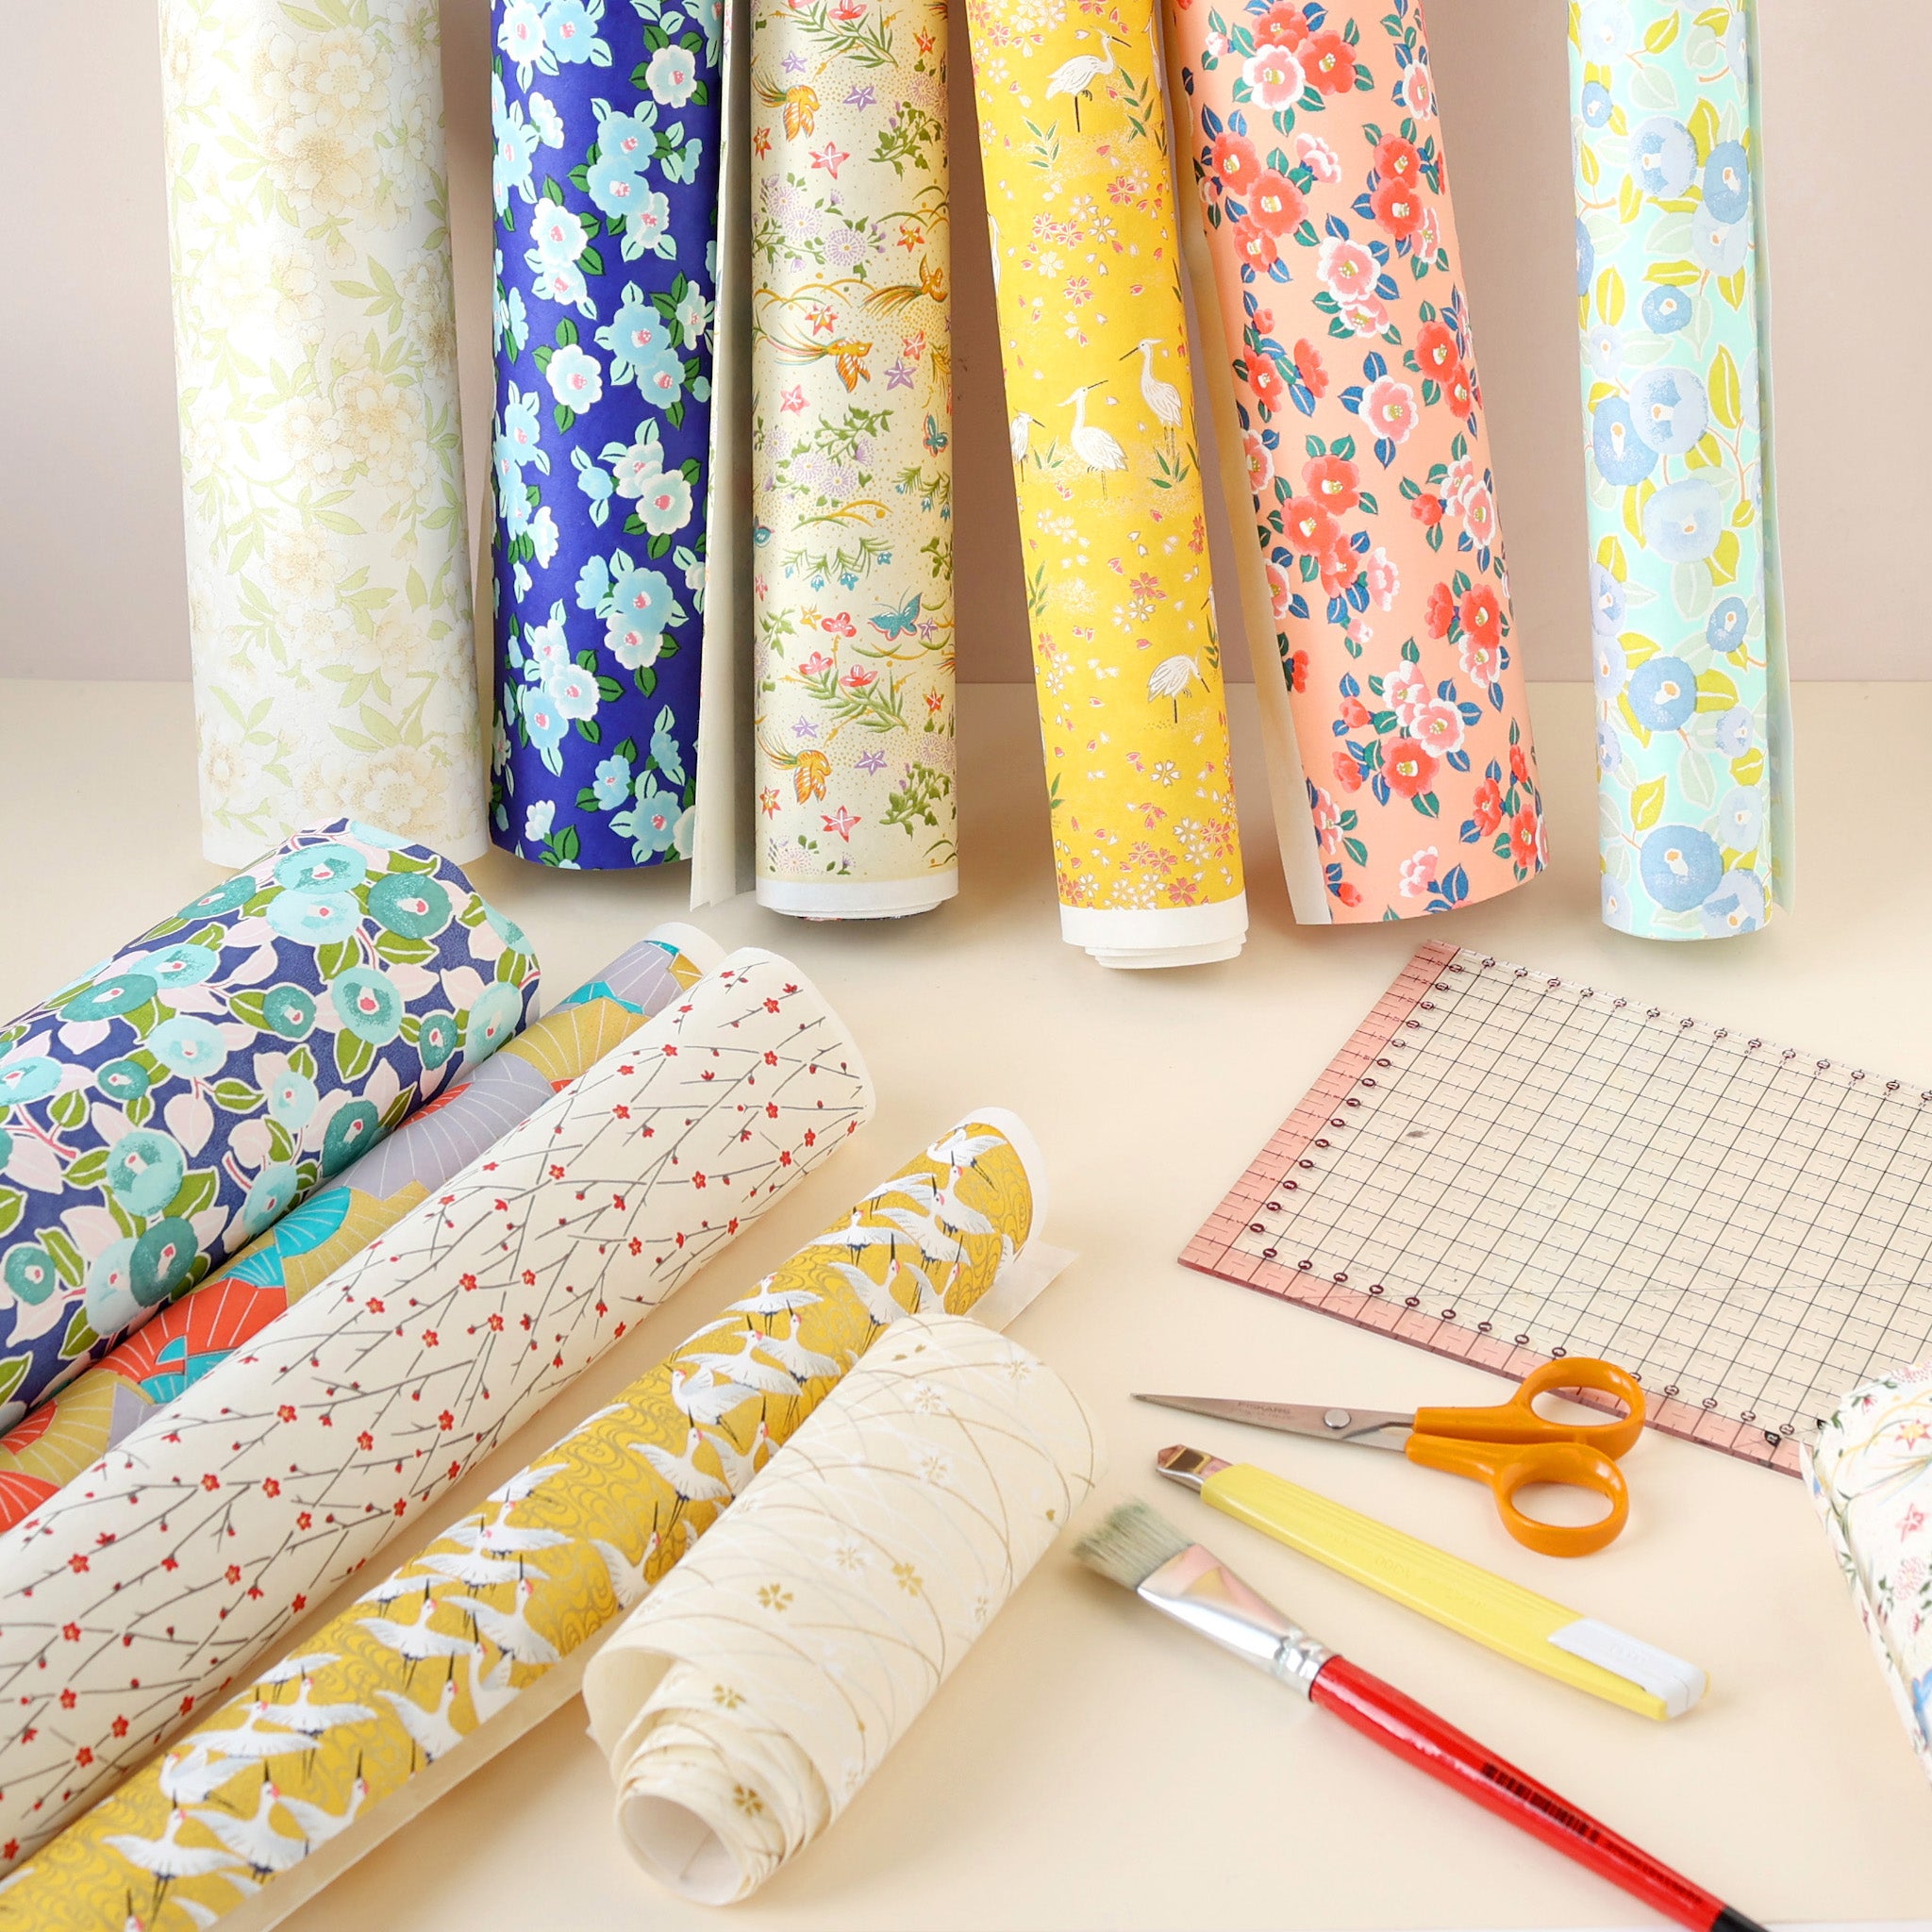 rolls of Japanese paper in various colors and patterns and ruler, brush, cutter and scissors